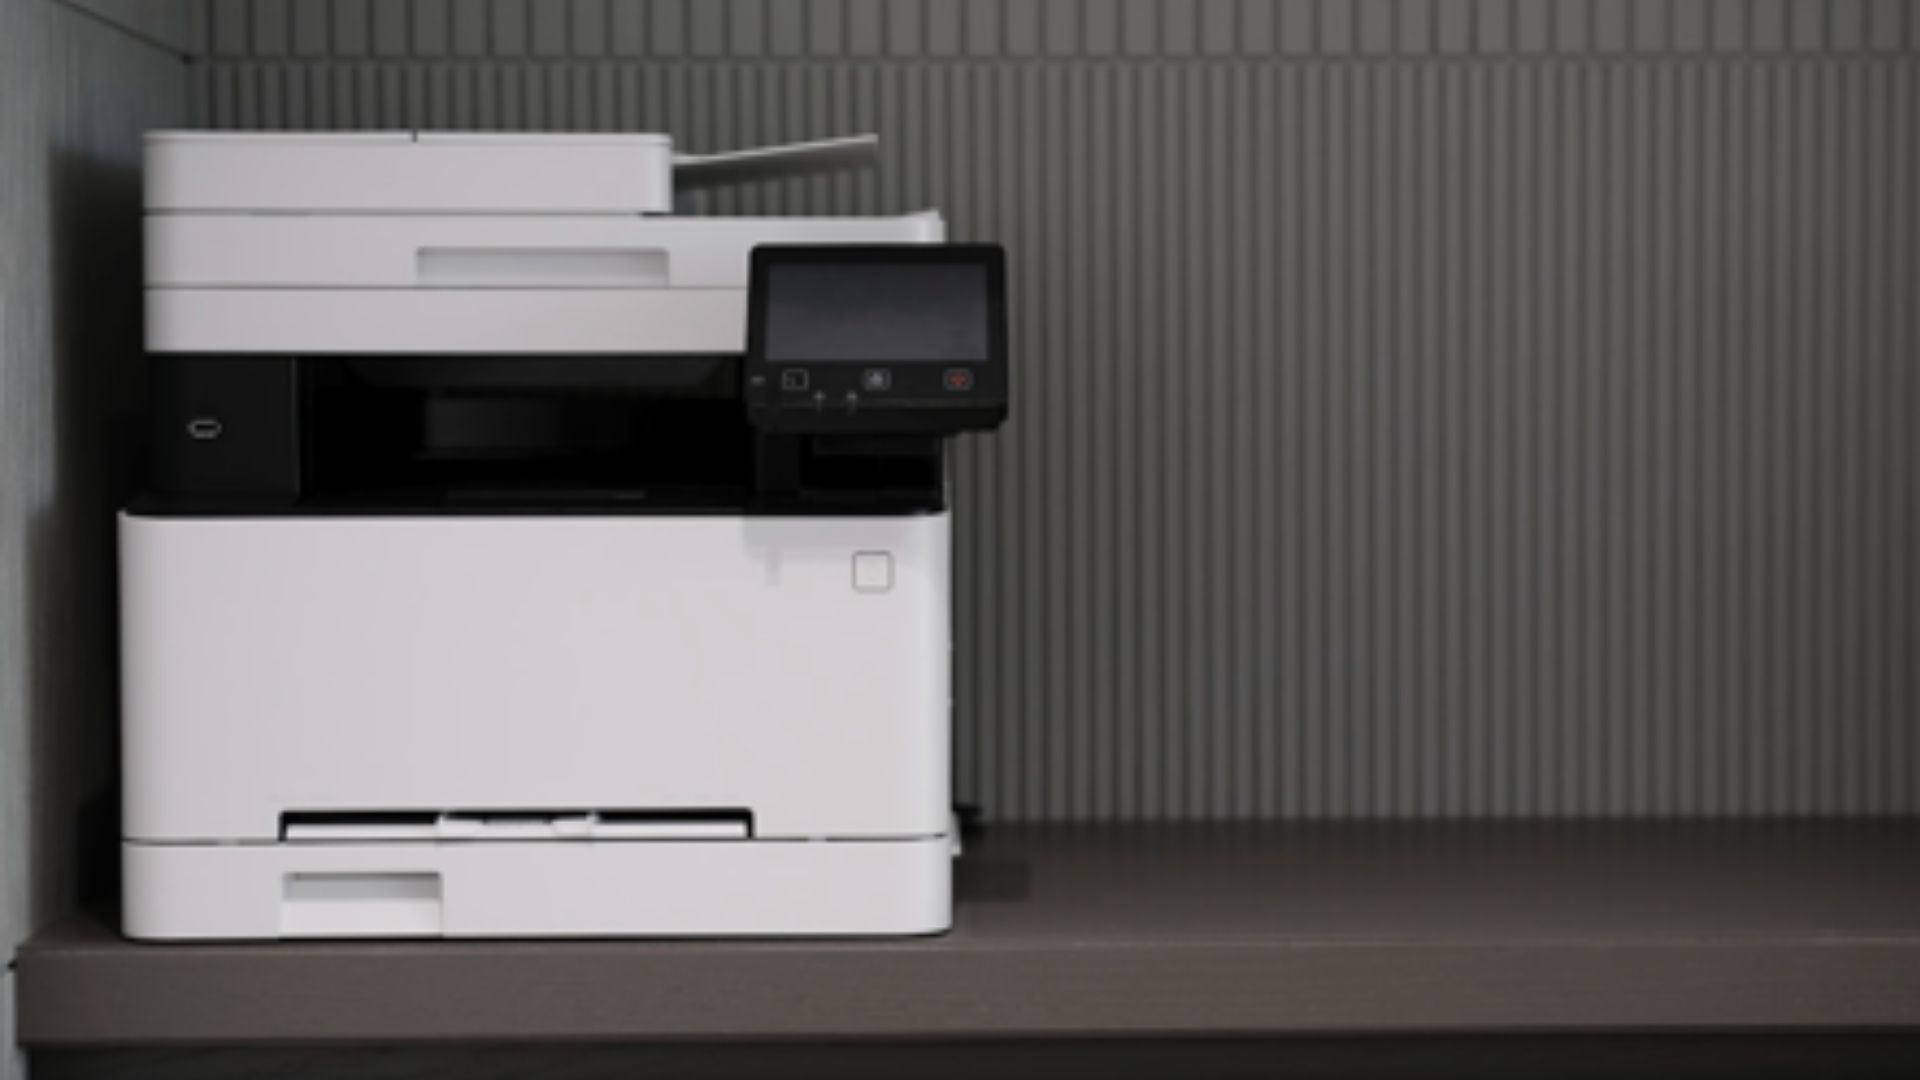 A cloud fax service changes the need for traditional fax machines